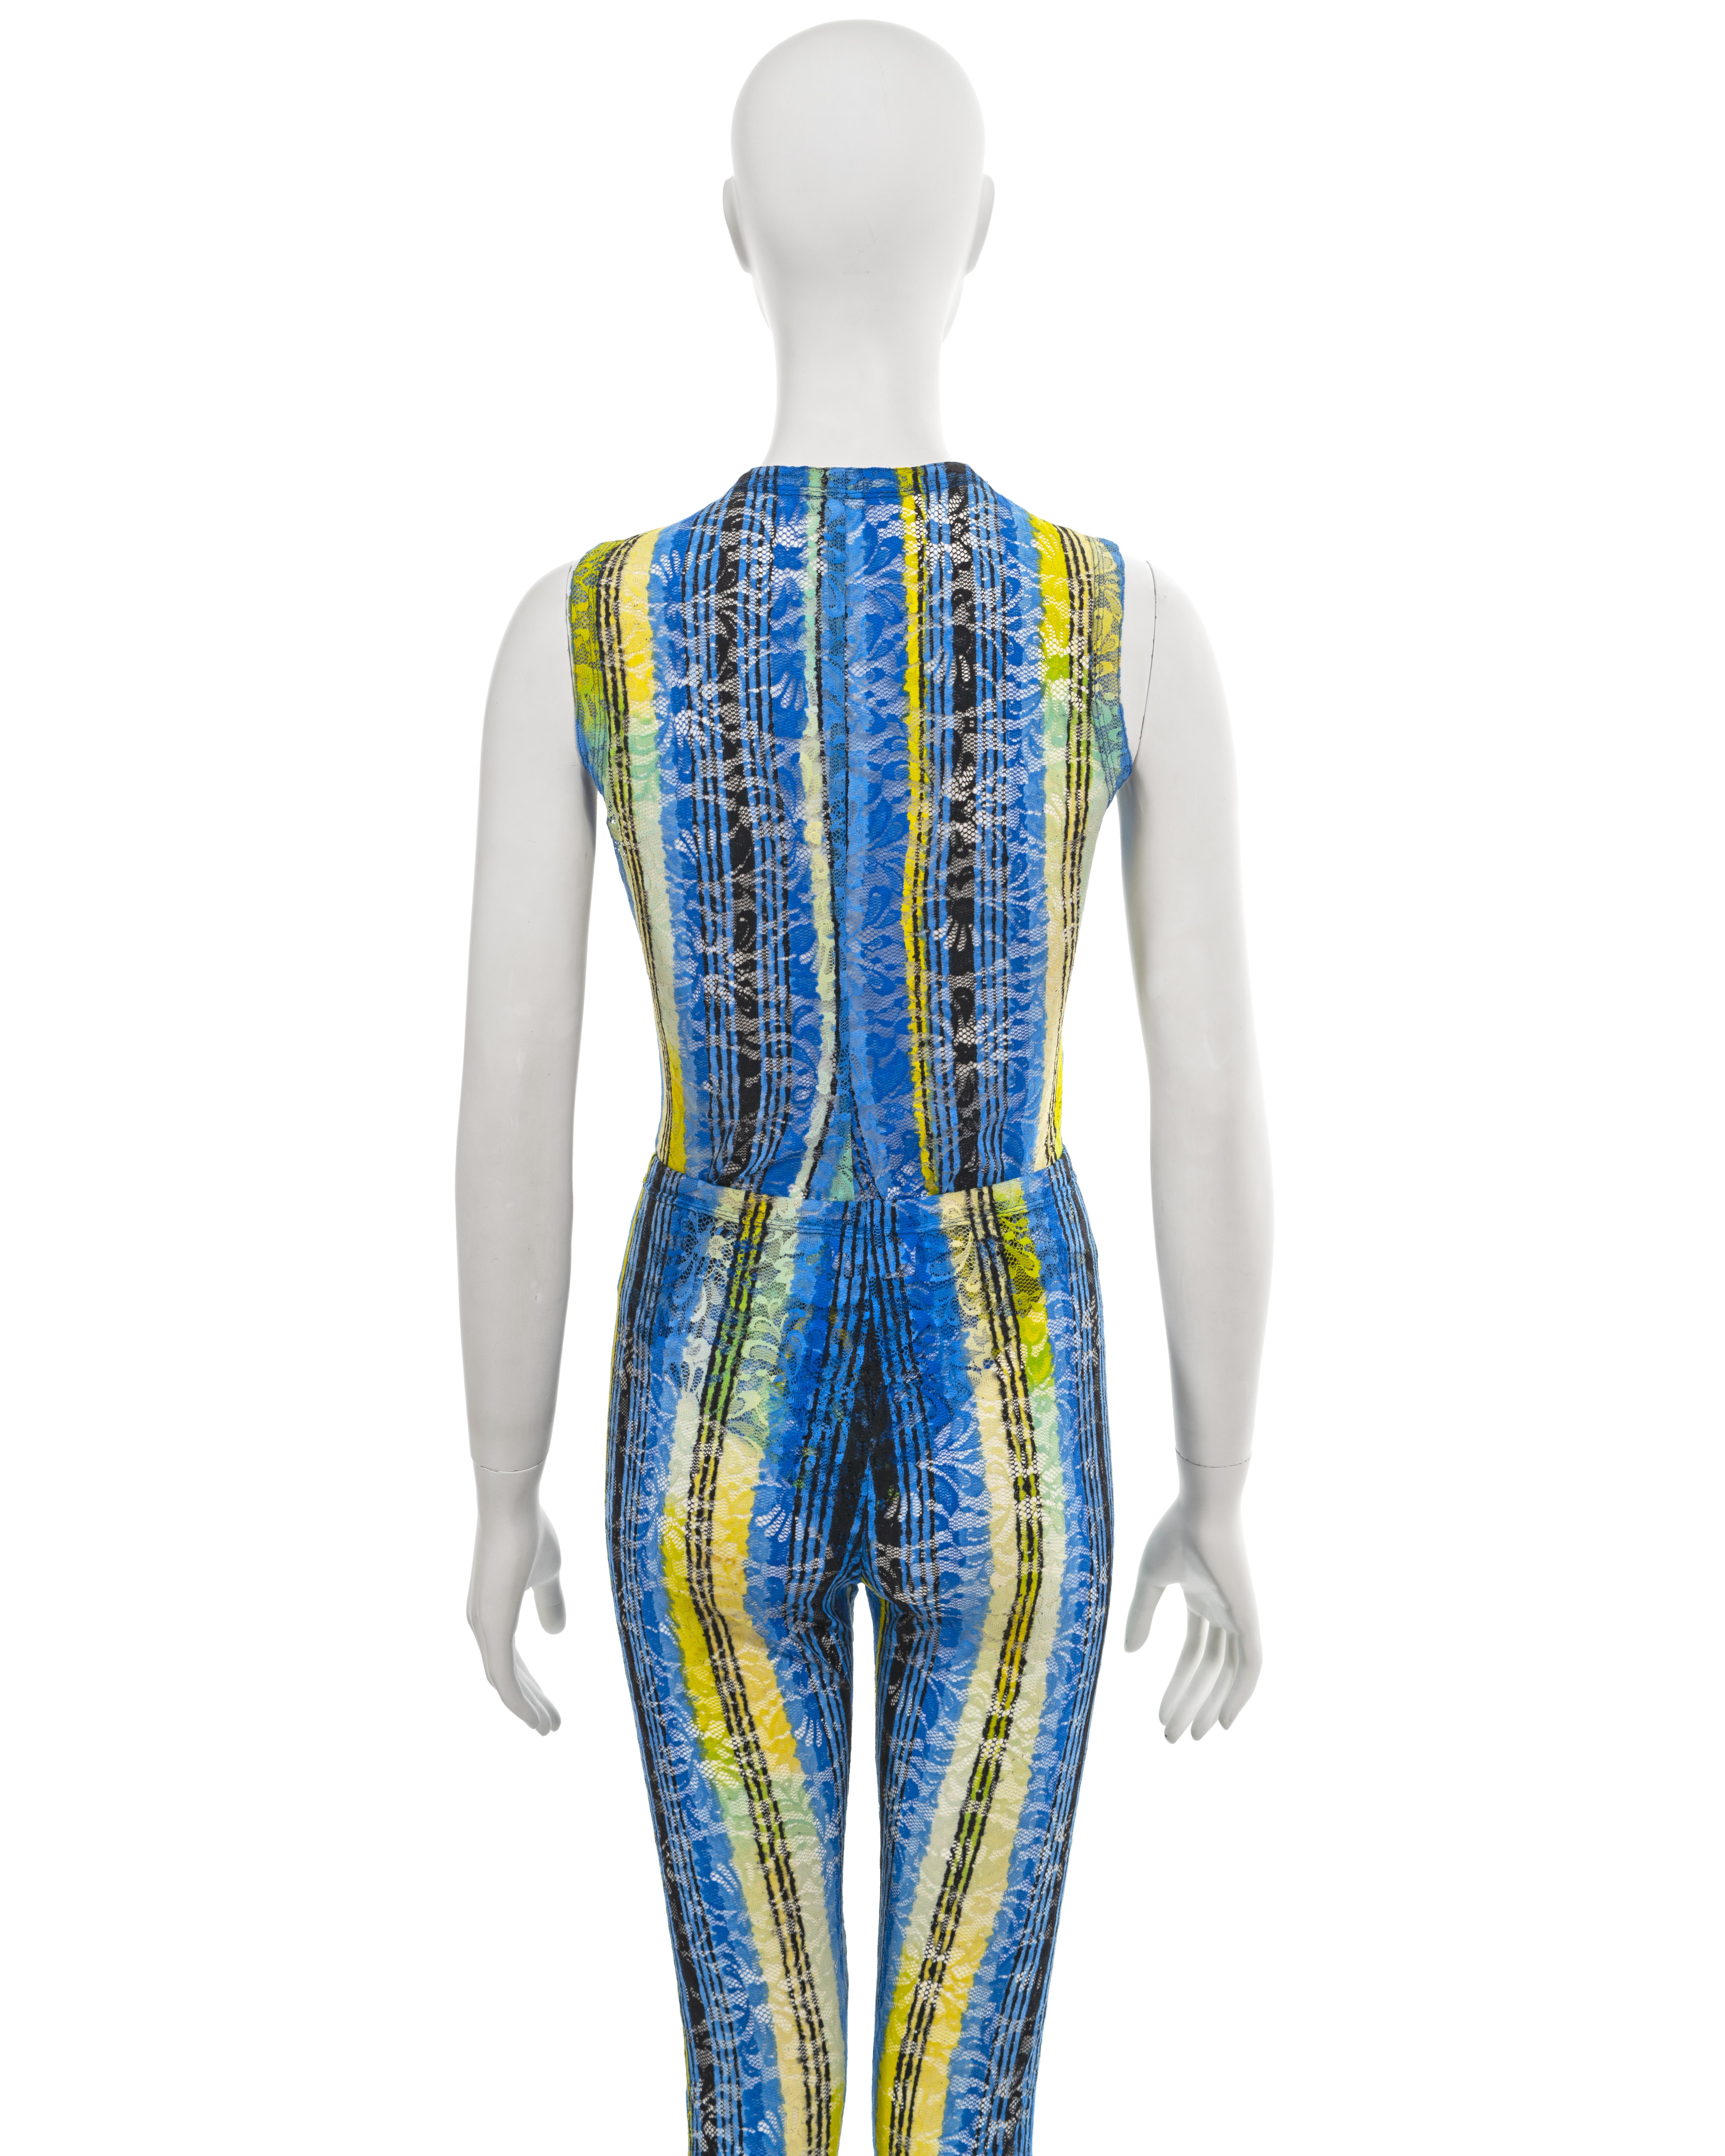 Gianni Versace blue lace bodysuit and leggings set, fw 1993 For Sale 4